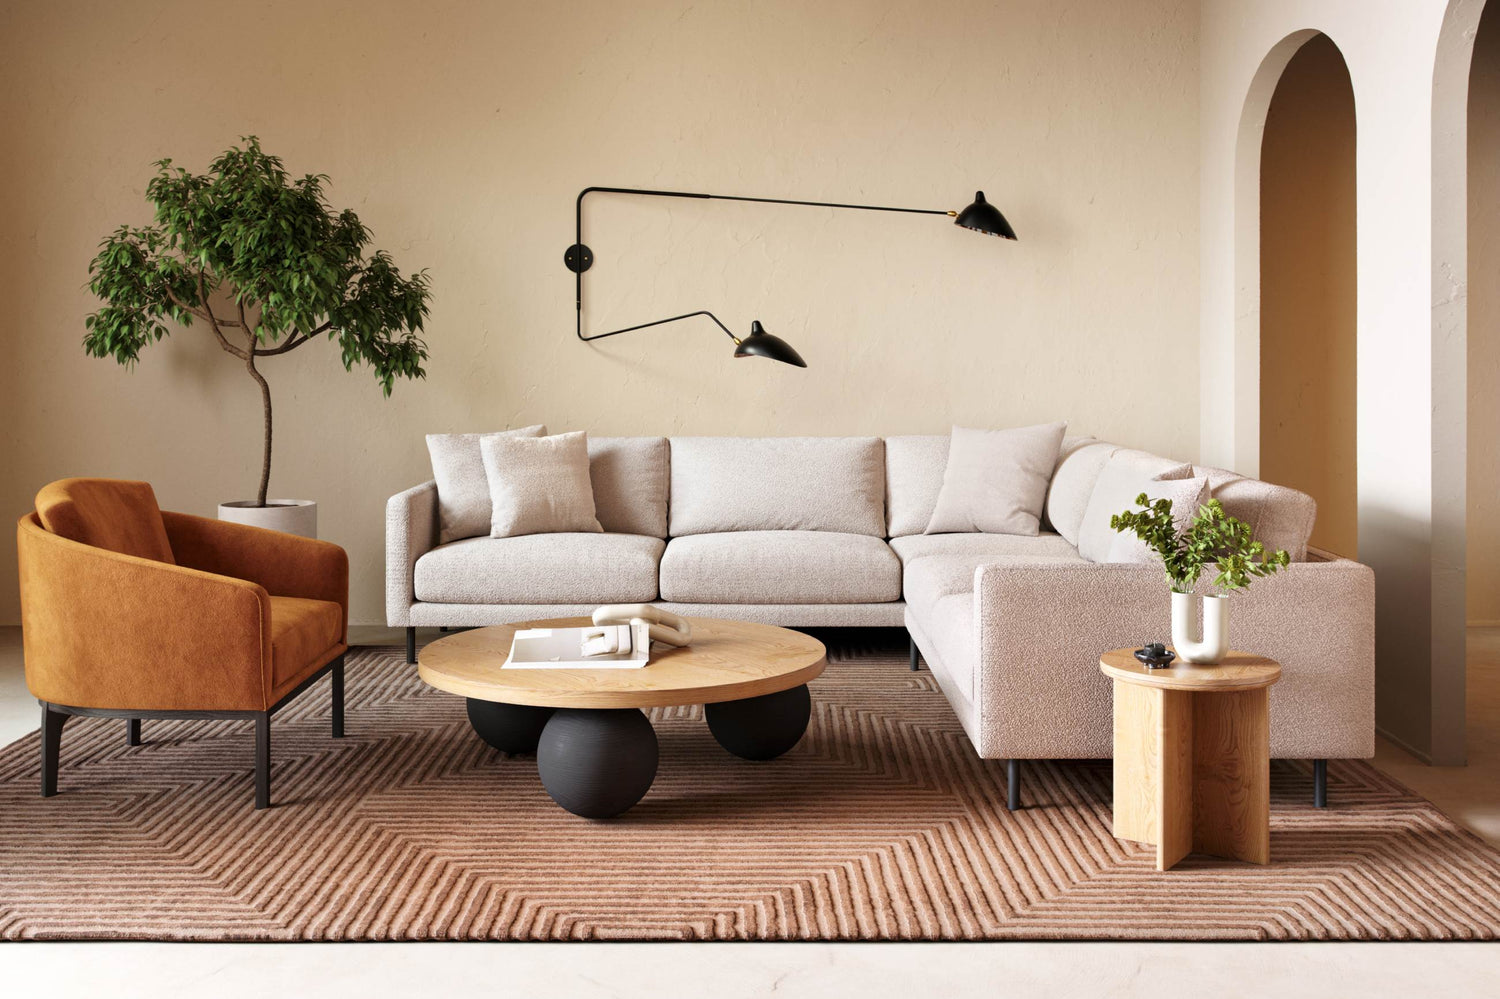 Modern white modular sofa, round timber coffee table and caramel armchair in a stylish living space